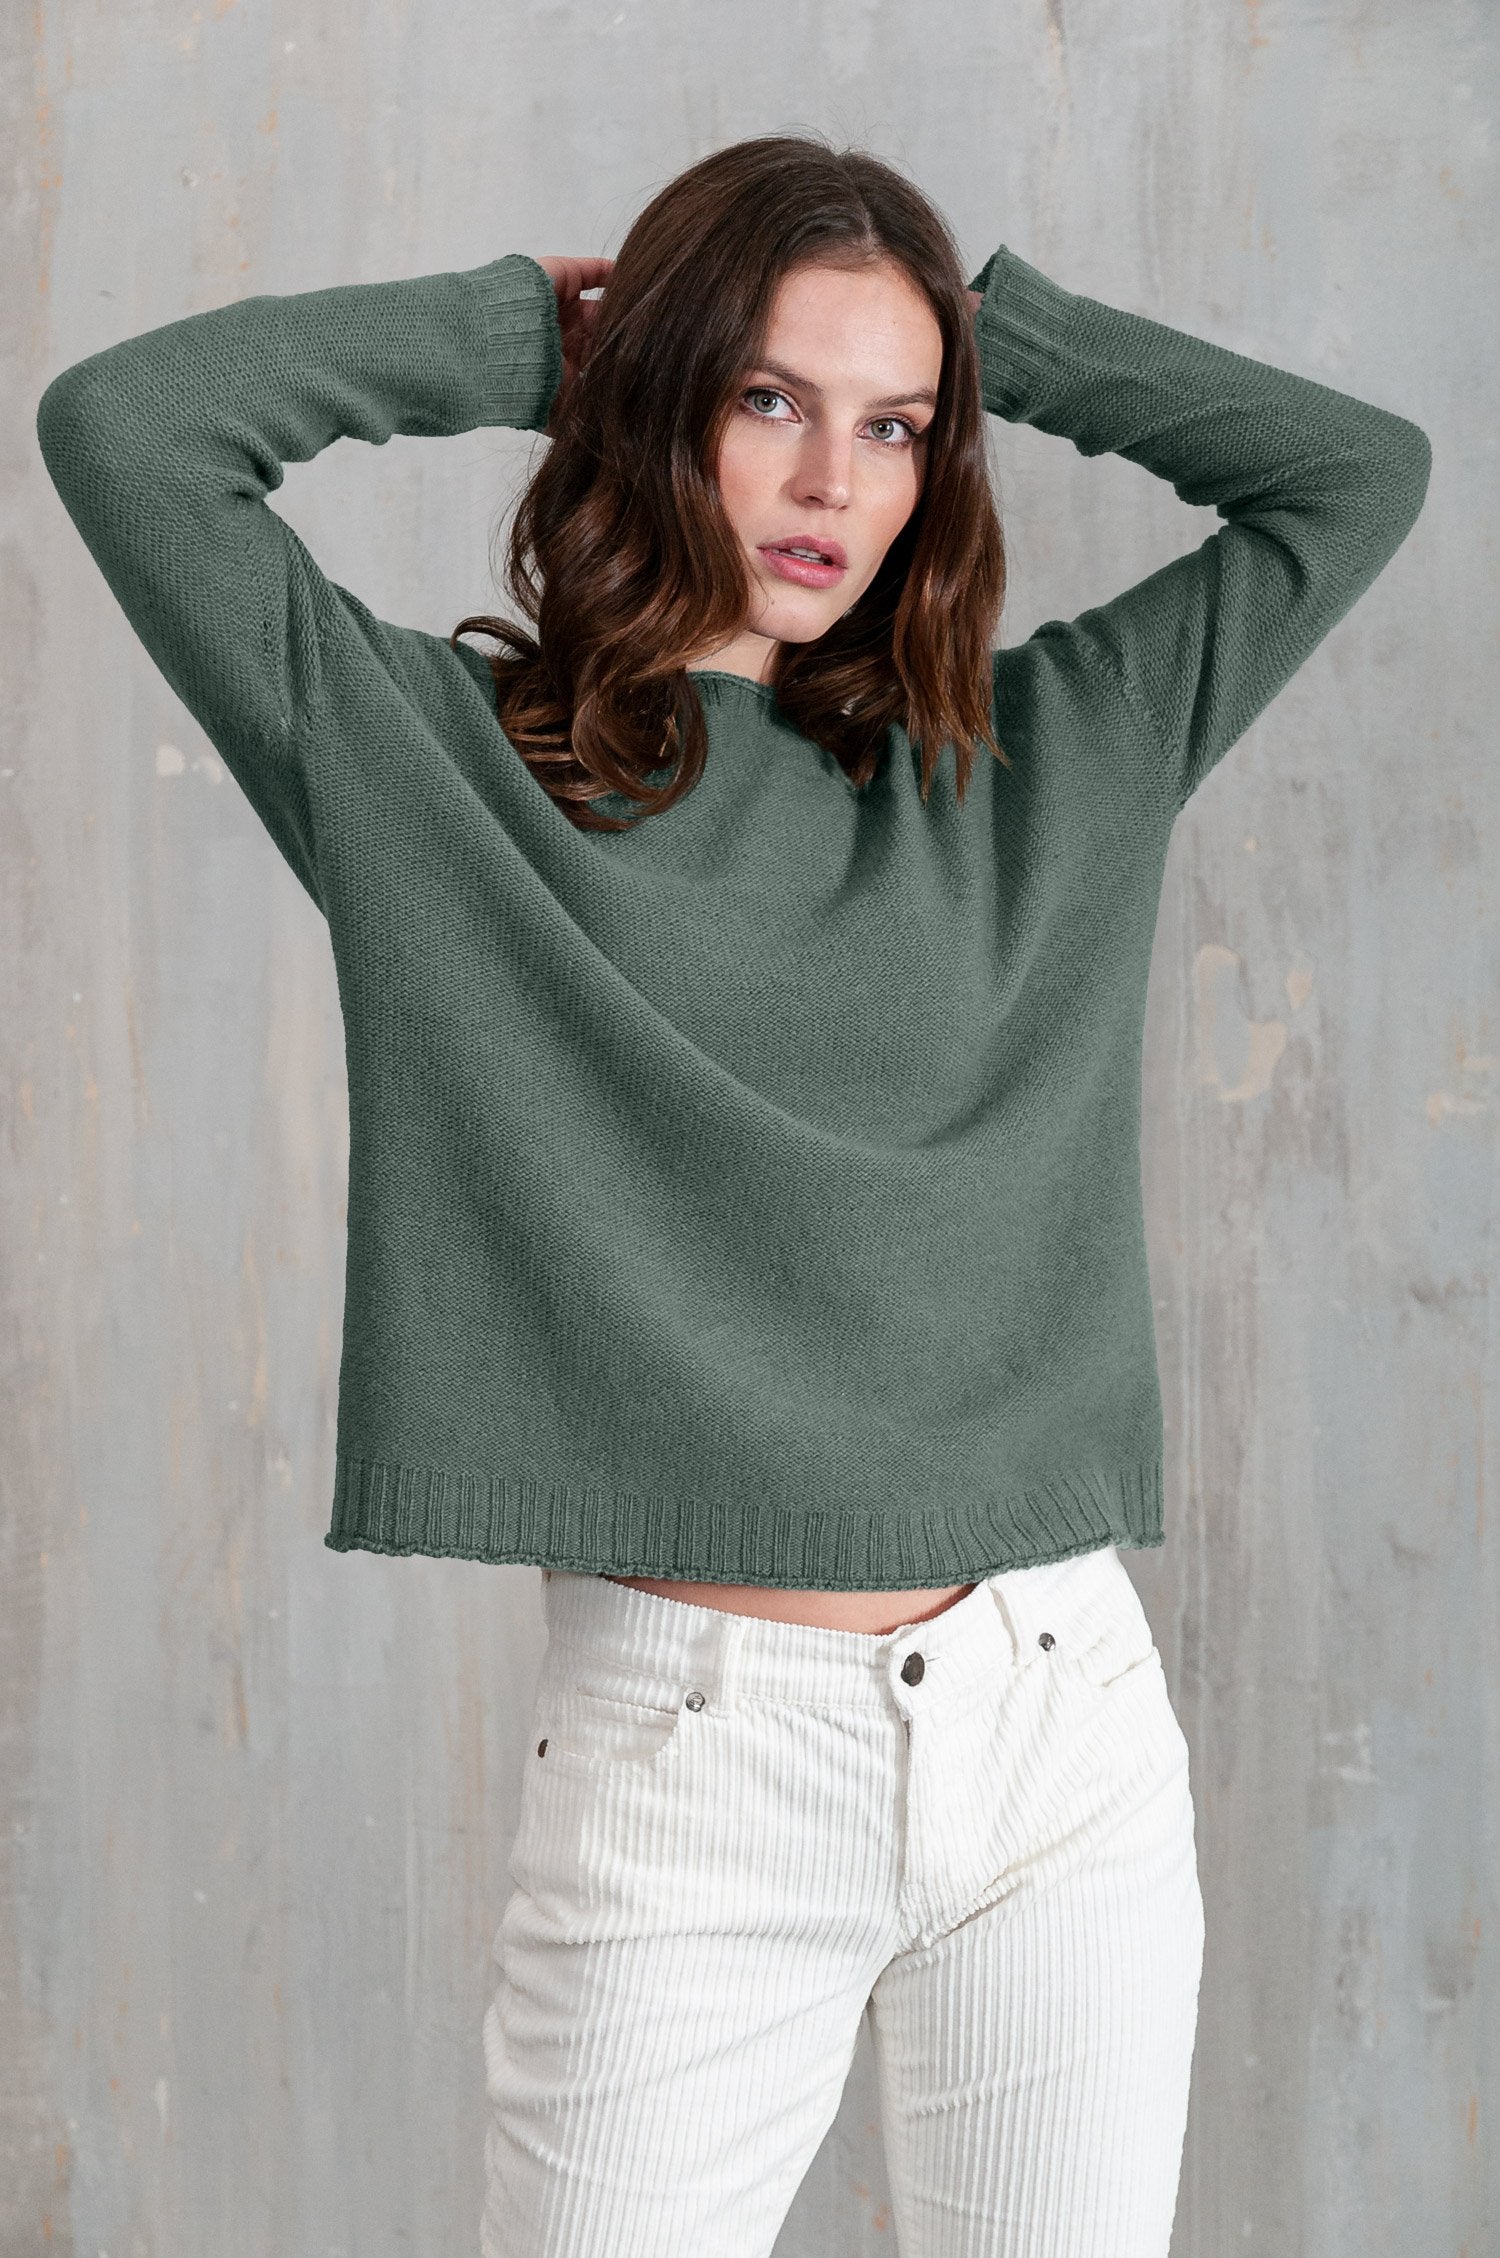 Mosshill Sage - Loose Fit Crew Sweater - Sweaters